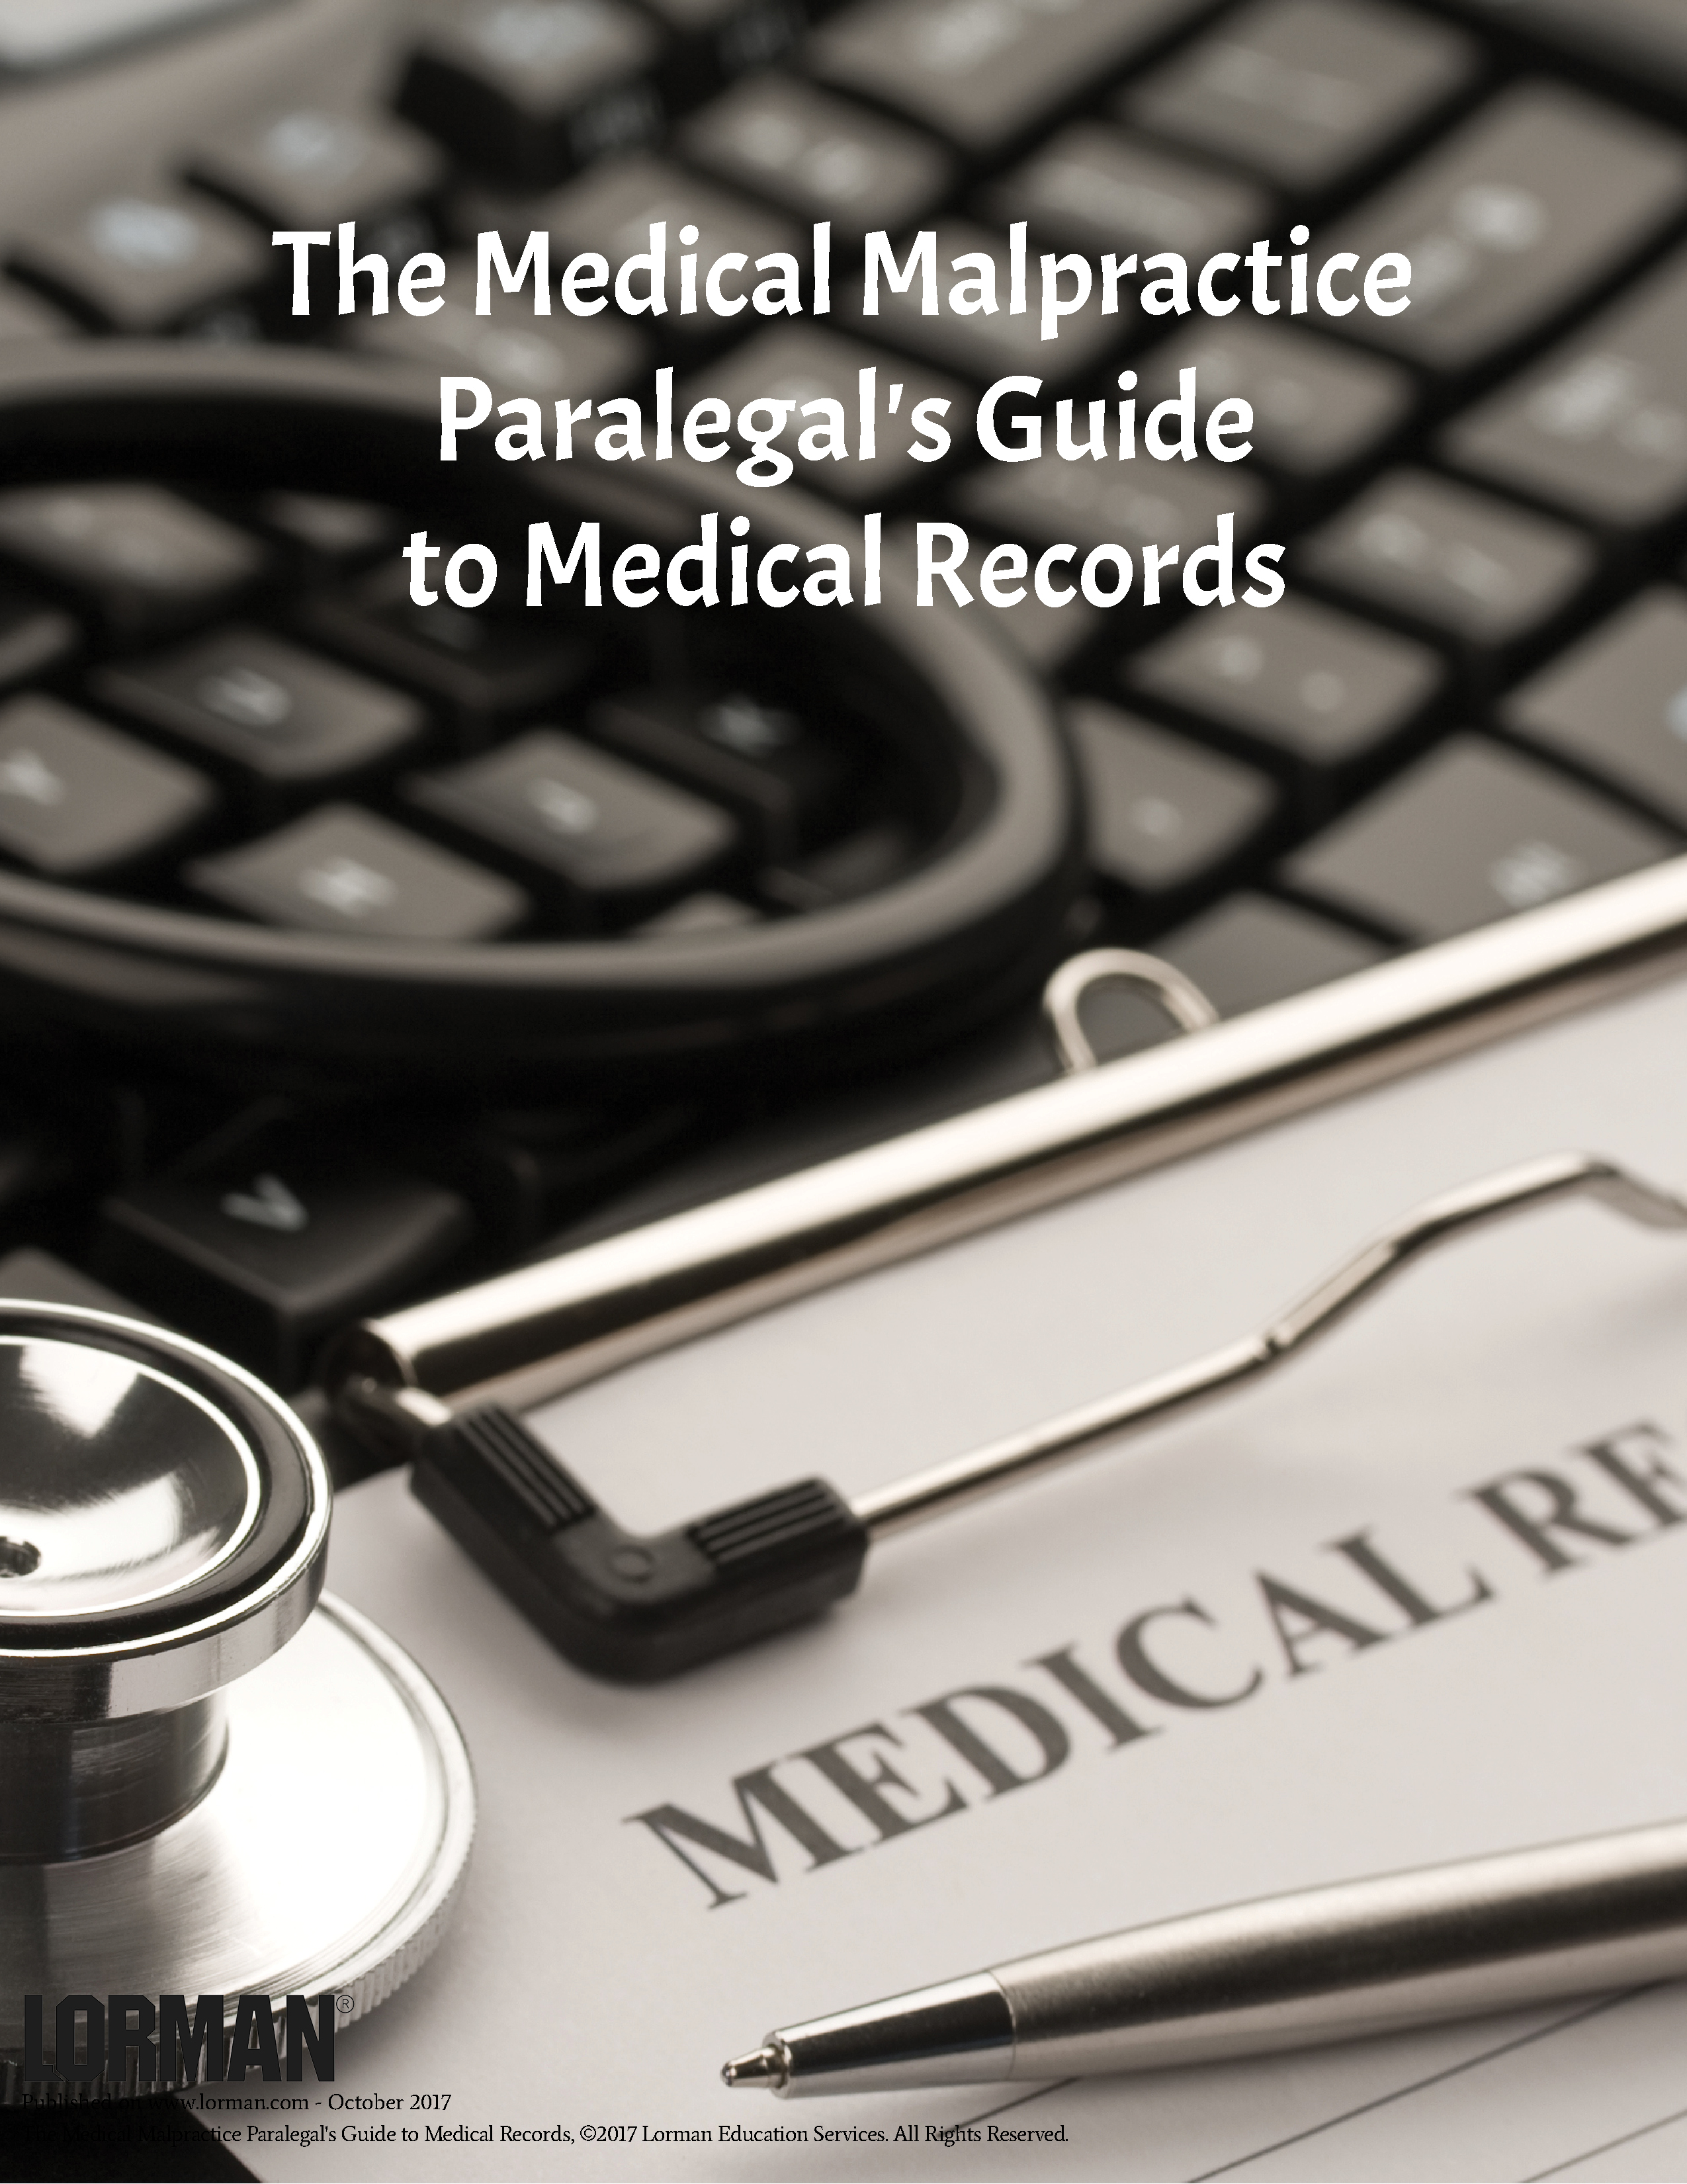 The Medical Malpractice Paralegal's Guide to Medical Records